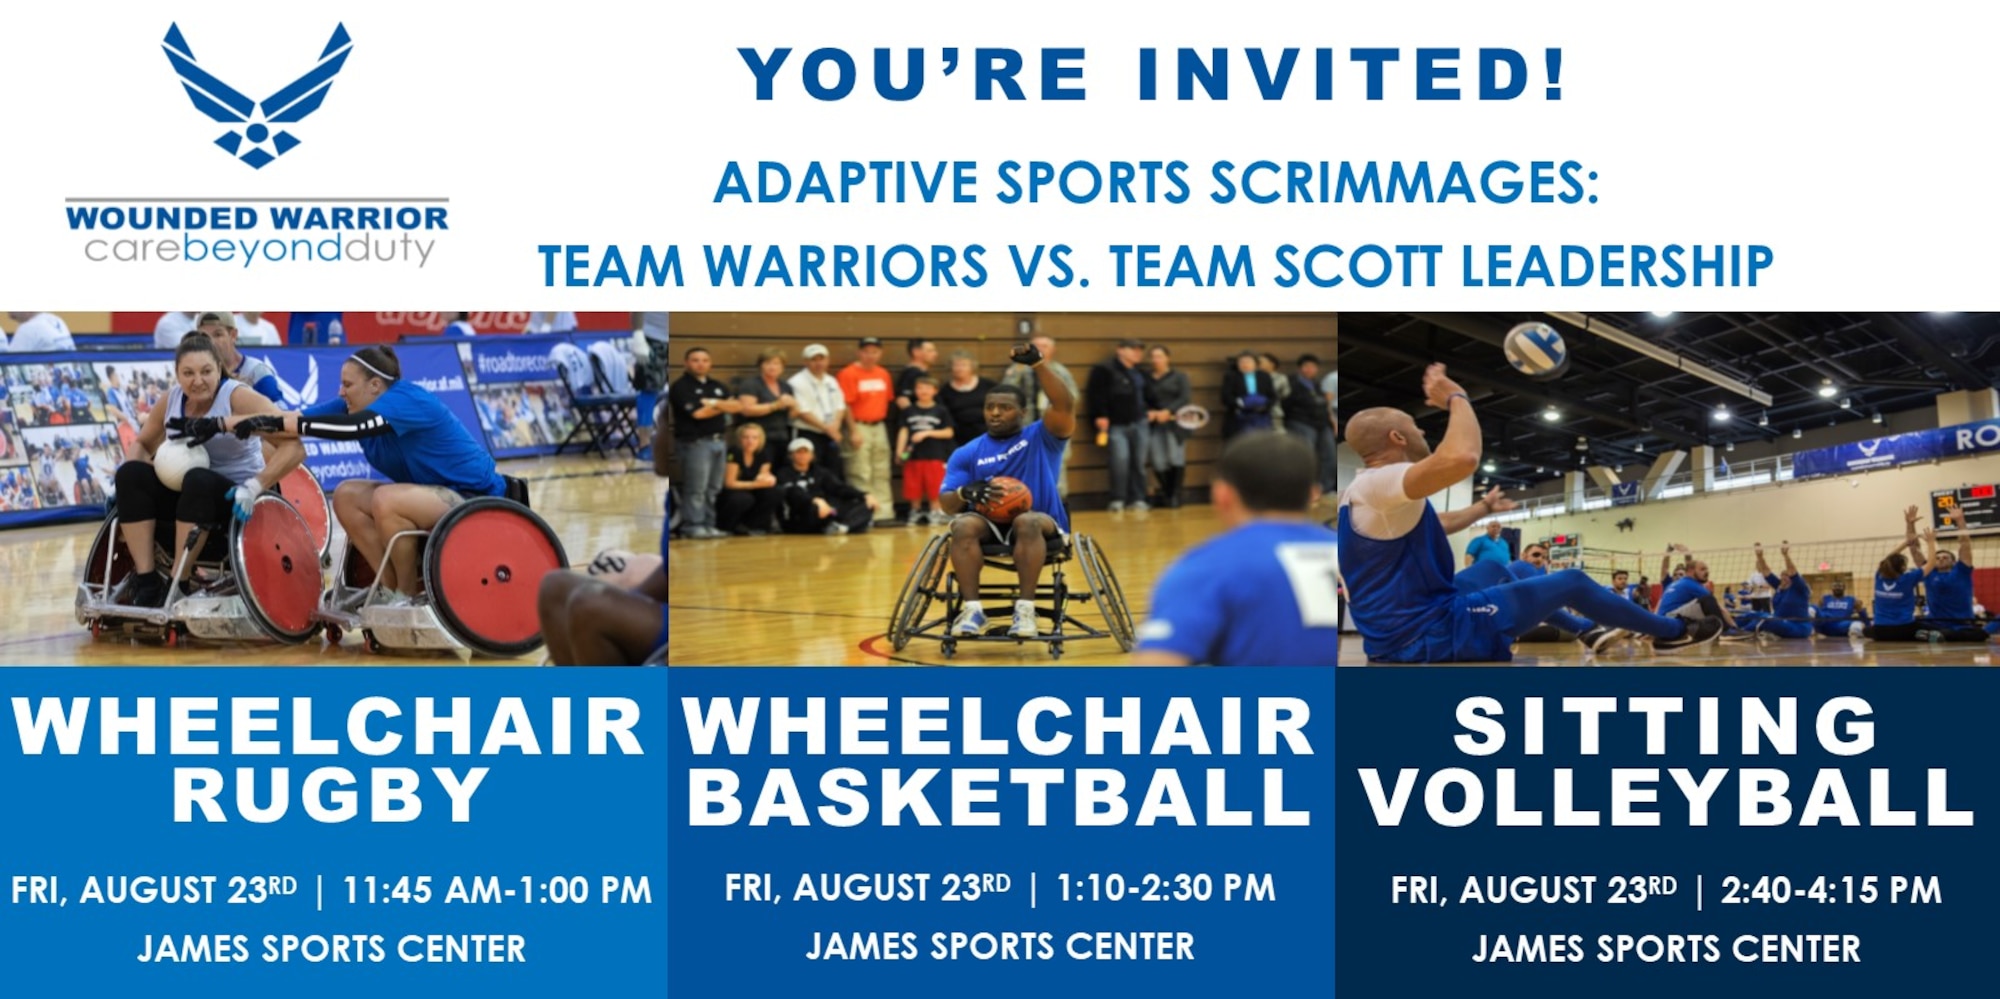 Poster invite for the adaptive sports scrimmages.